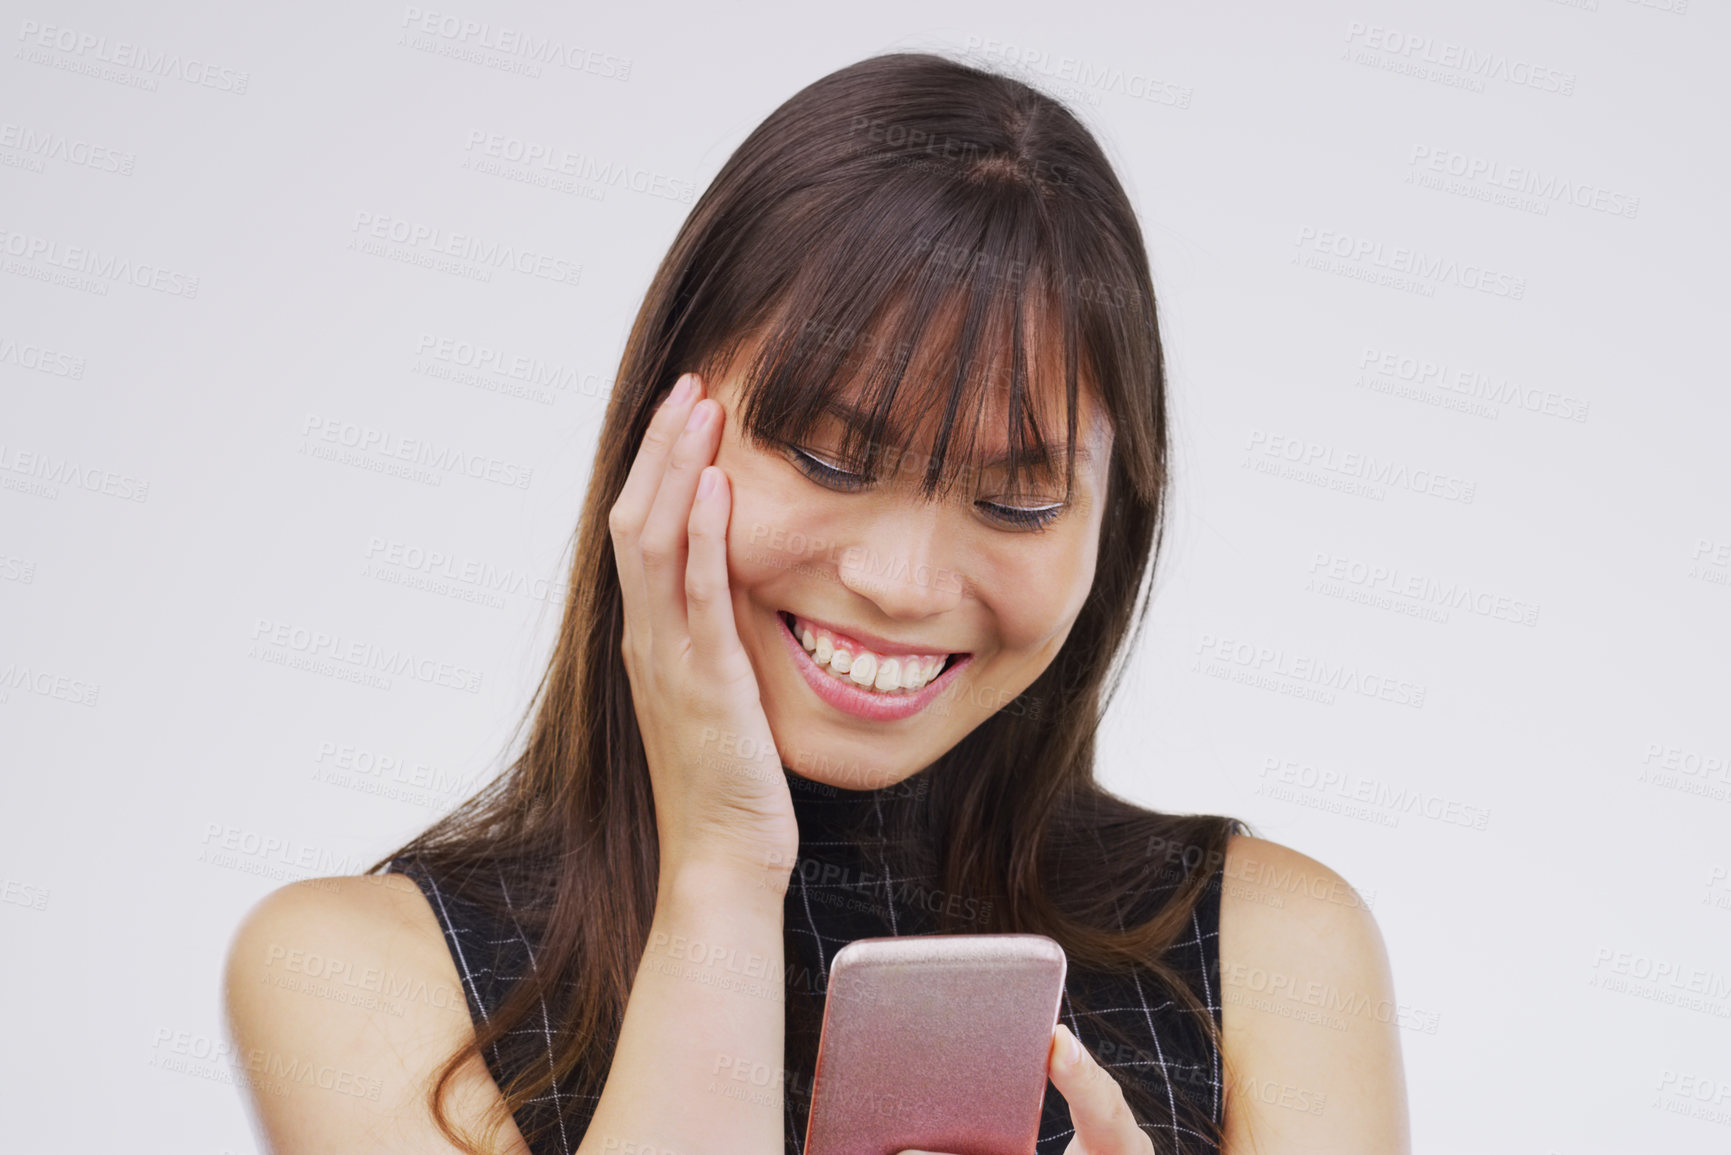 Buy stock photo Studio shot of a young woman using her cellphone against a grey background